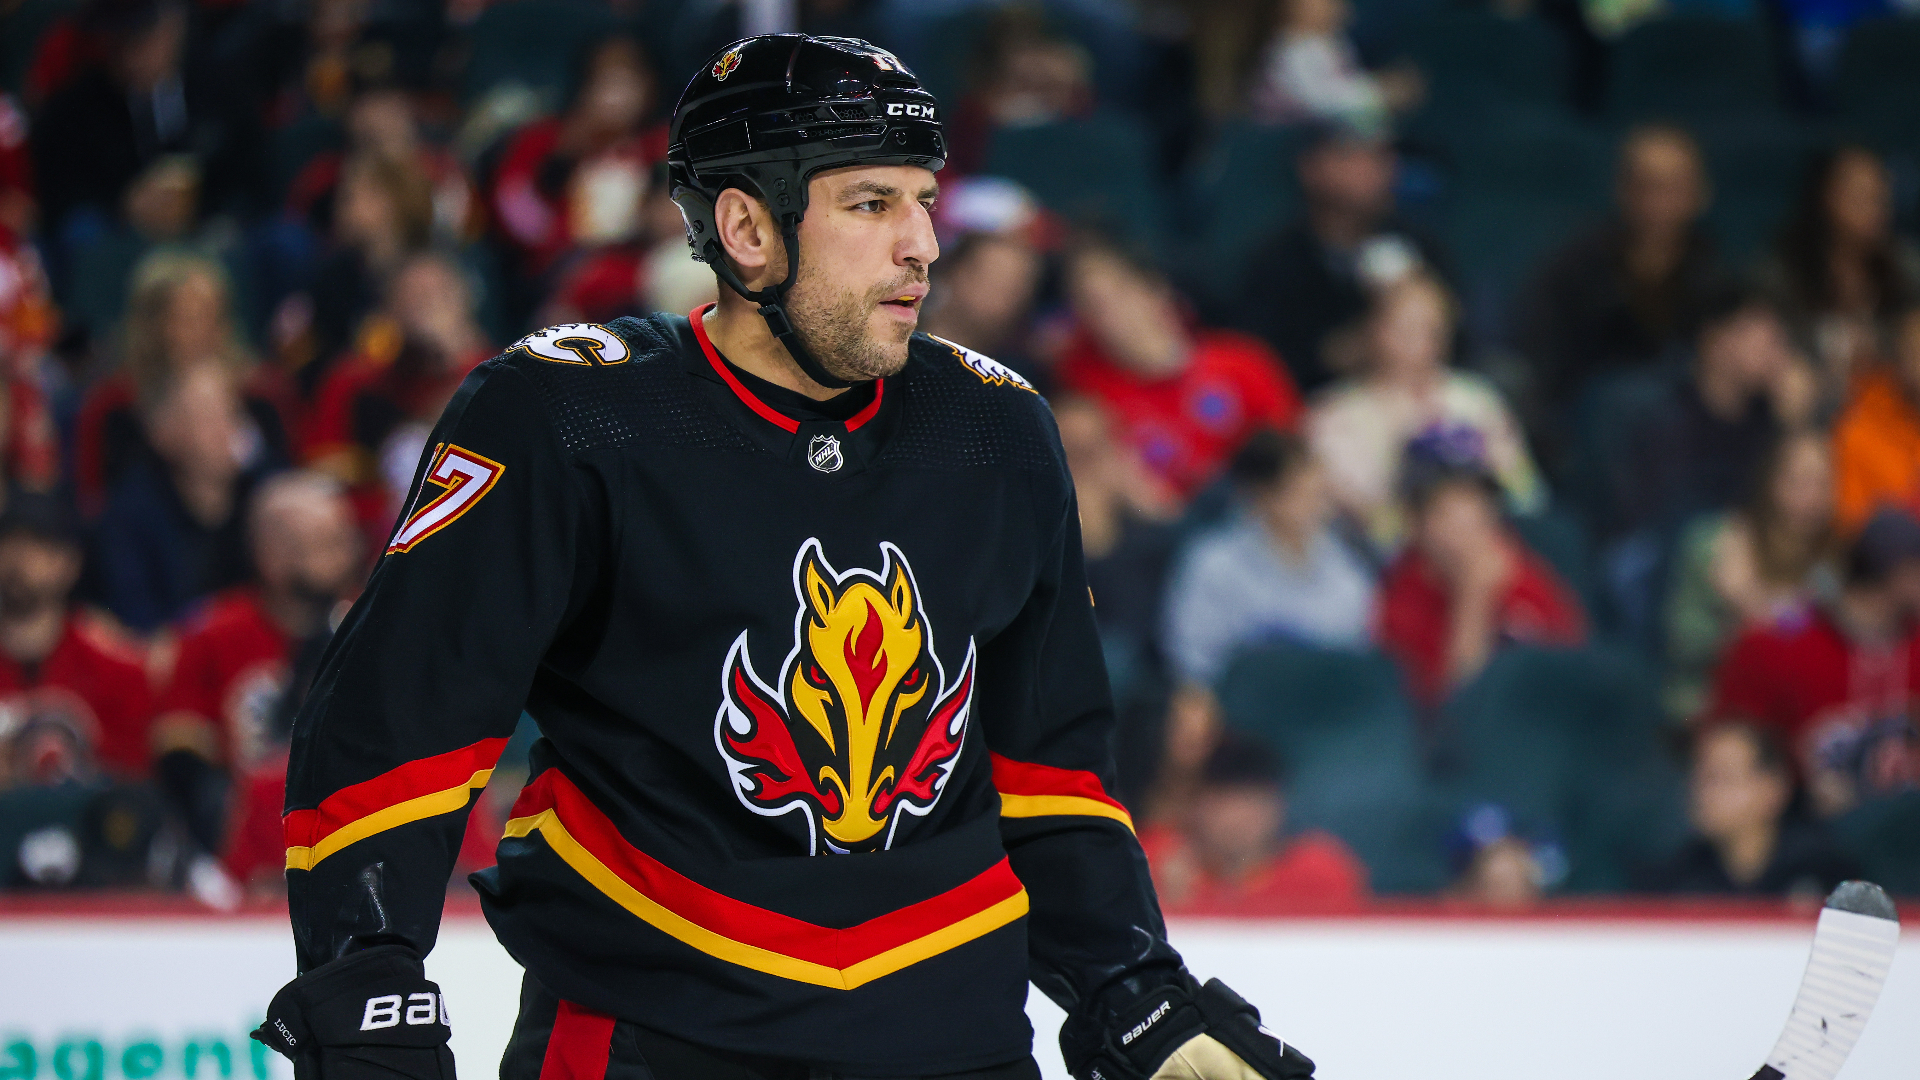 Bruins officially reunite with fan favorite Milan Lucic